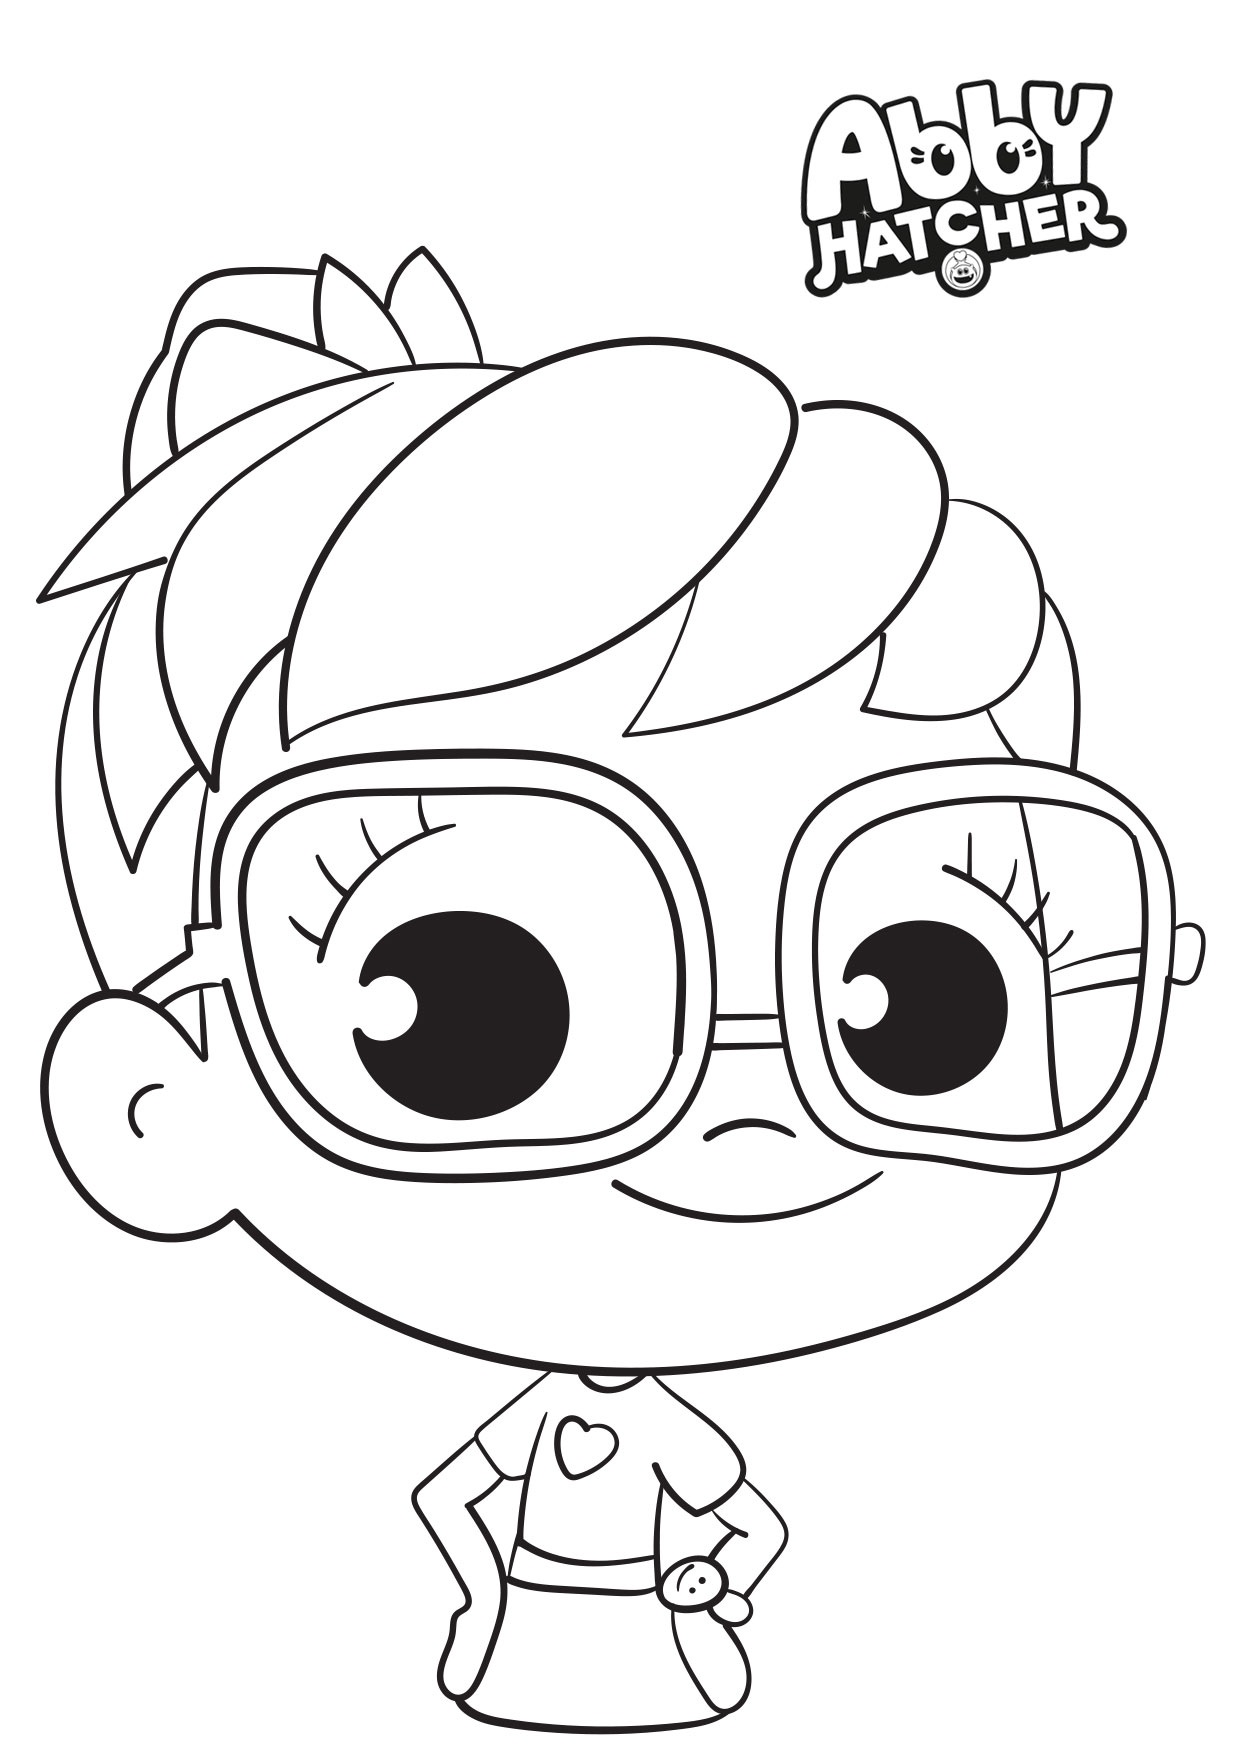 Abby Hatcher Abby Hatcher Coloring Pages Coloring Pages For Kids 